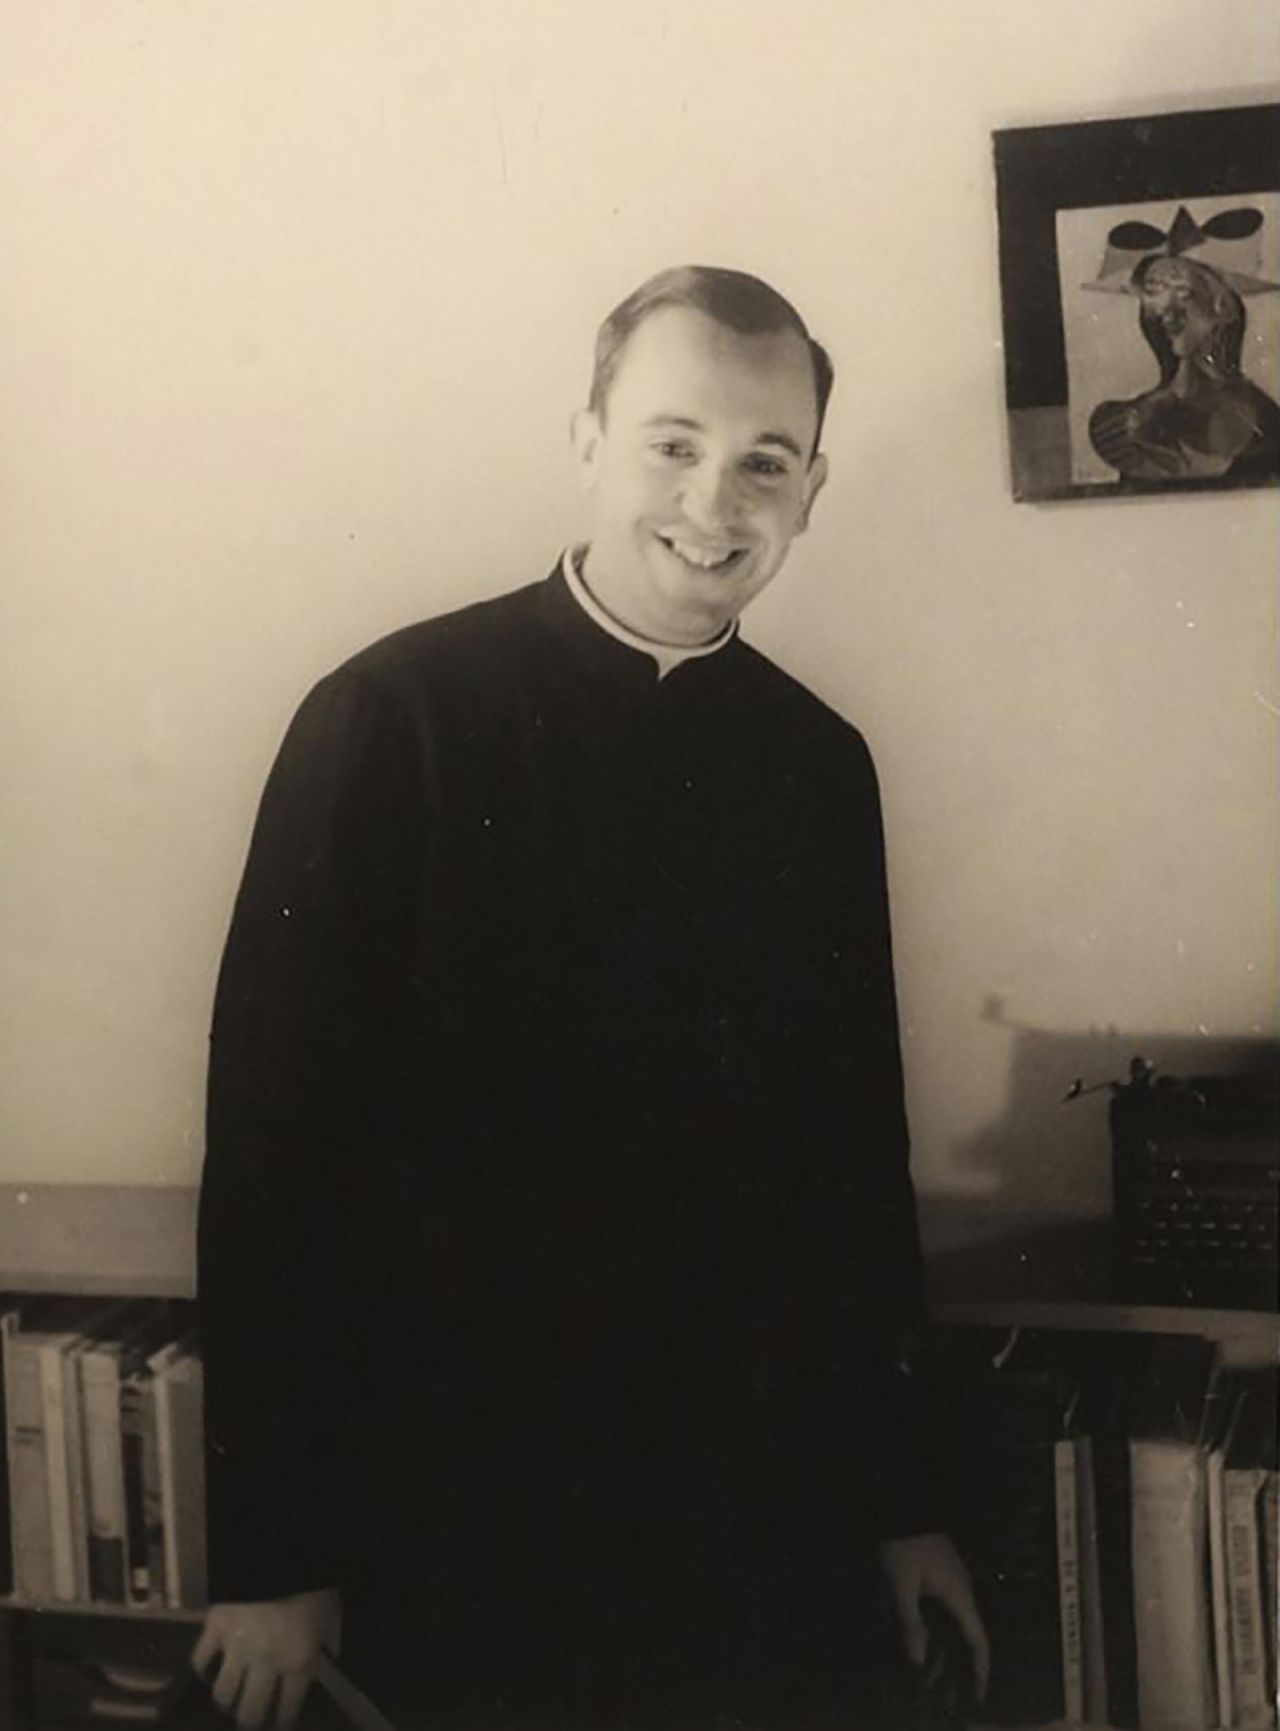 Francis was ordained as a priest in 1969. In high school, he studied to become a chemical technician.